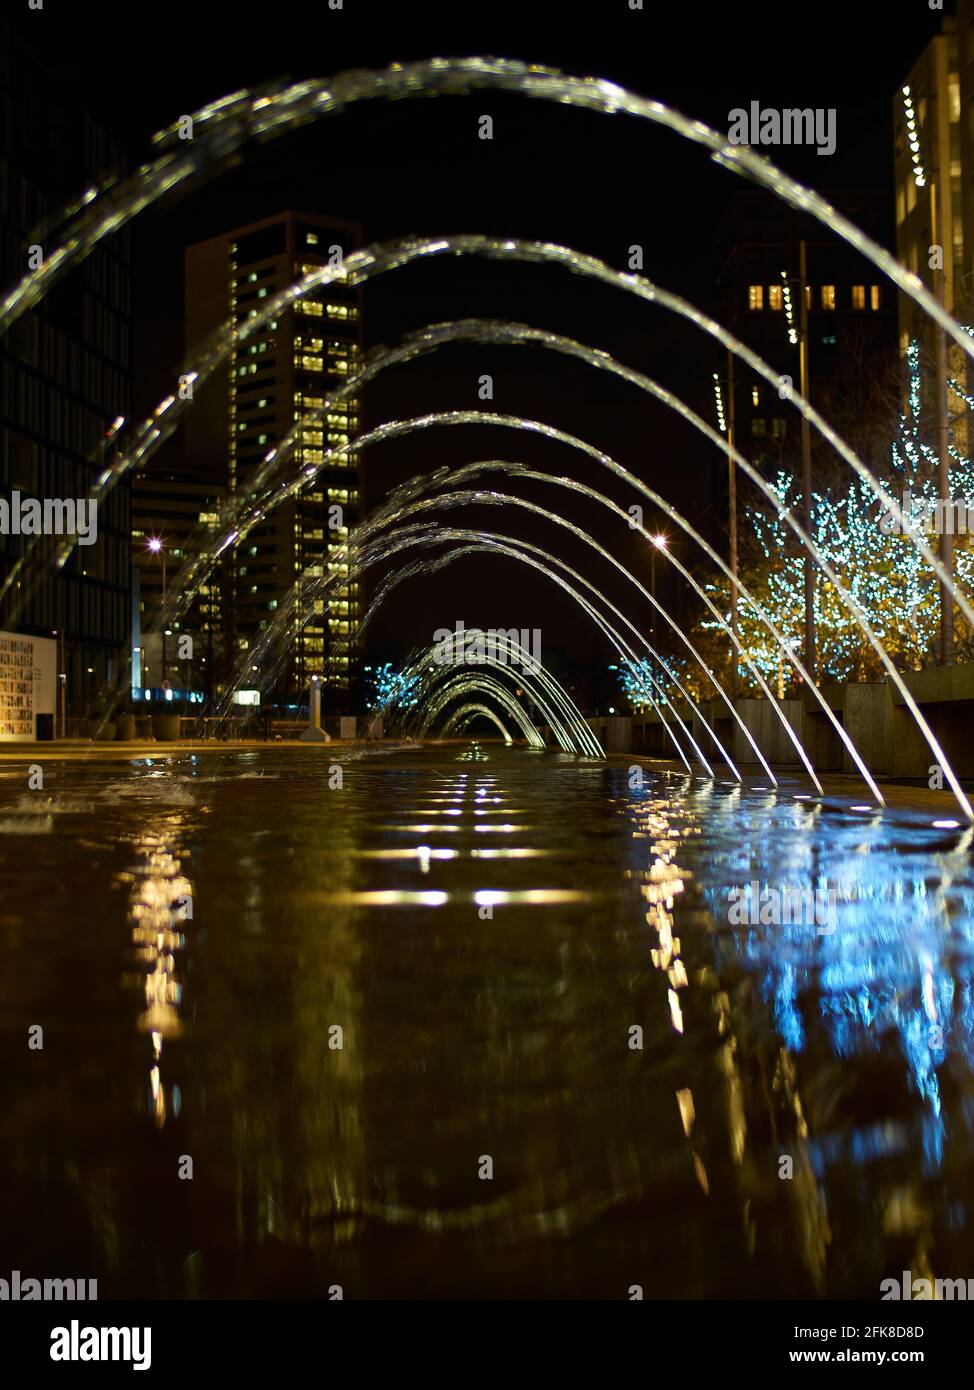 A slow-shutter, low angle view along a set of fountains, forming a tunnel with the blurred motion, surrounded by aspirational residential buildings. Stock Photo